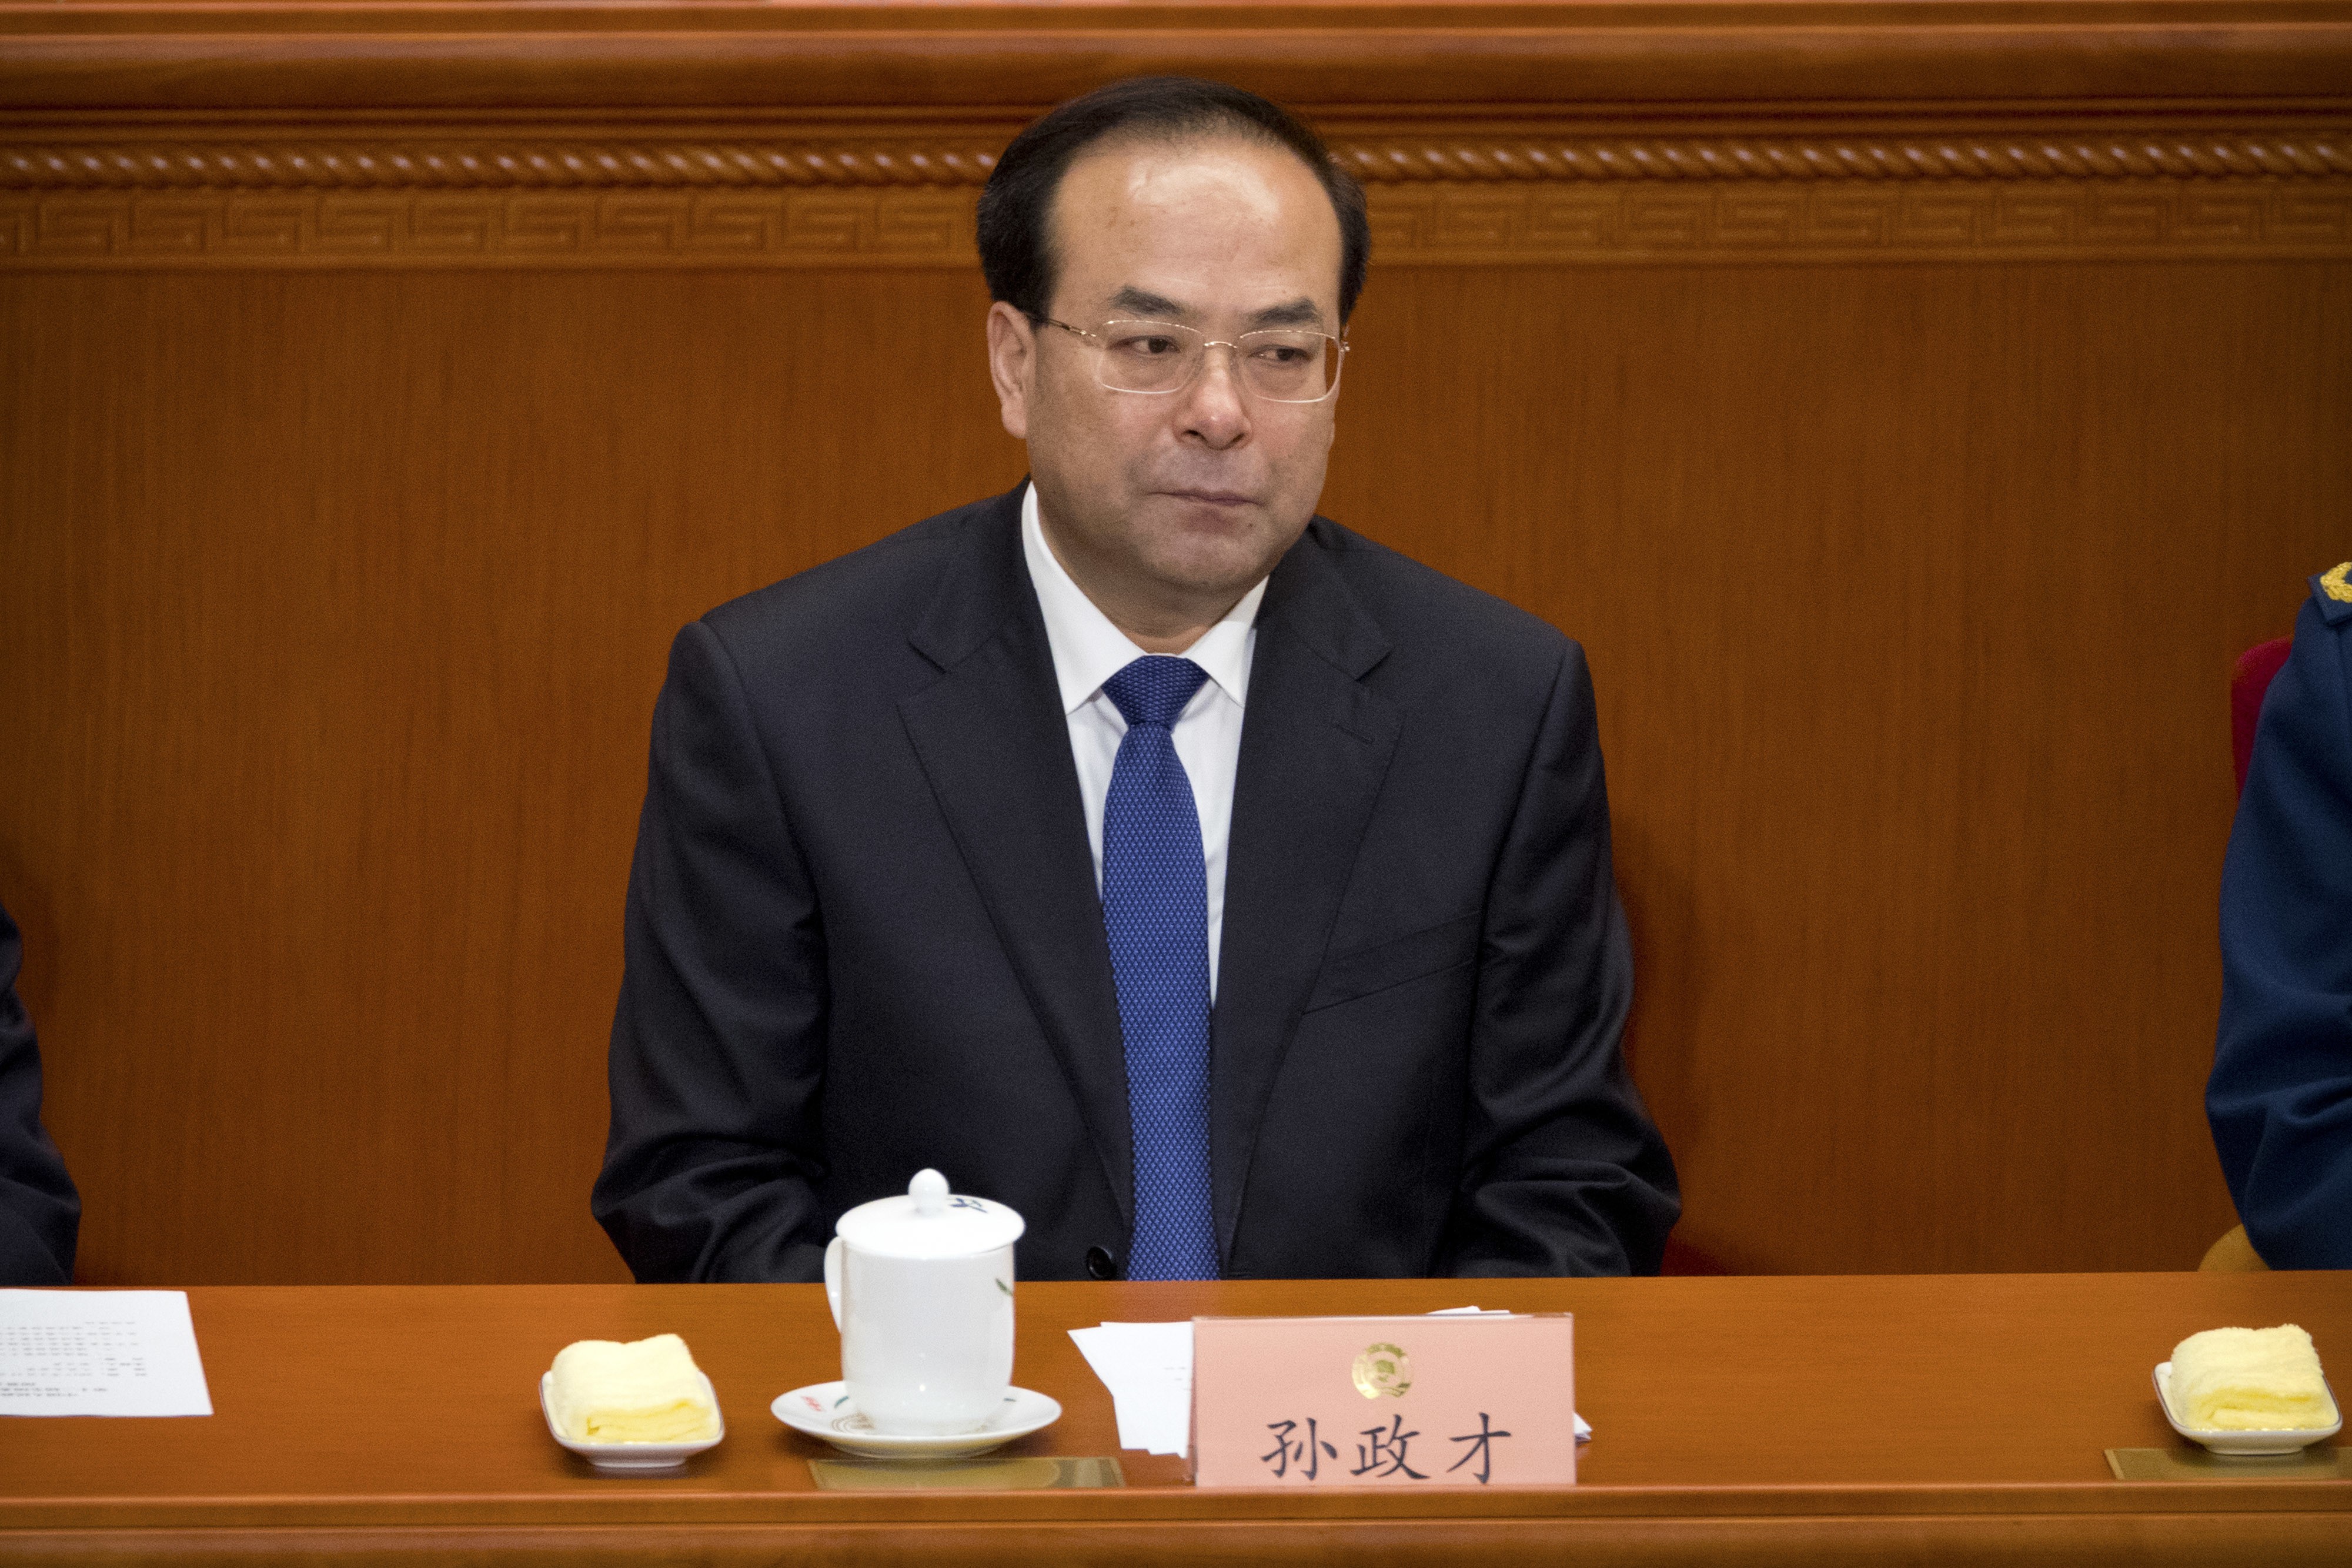 Sun Zhengcai has been charged with bribery during various posts going back 15 years in Chongqing, Beijing, Jilin province, and as minister of agriculture. Photo: AP